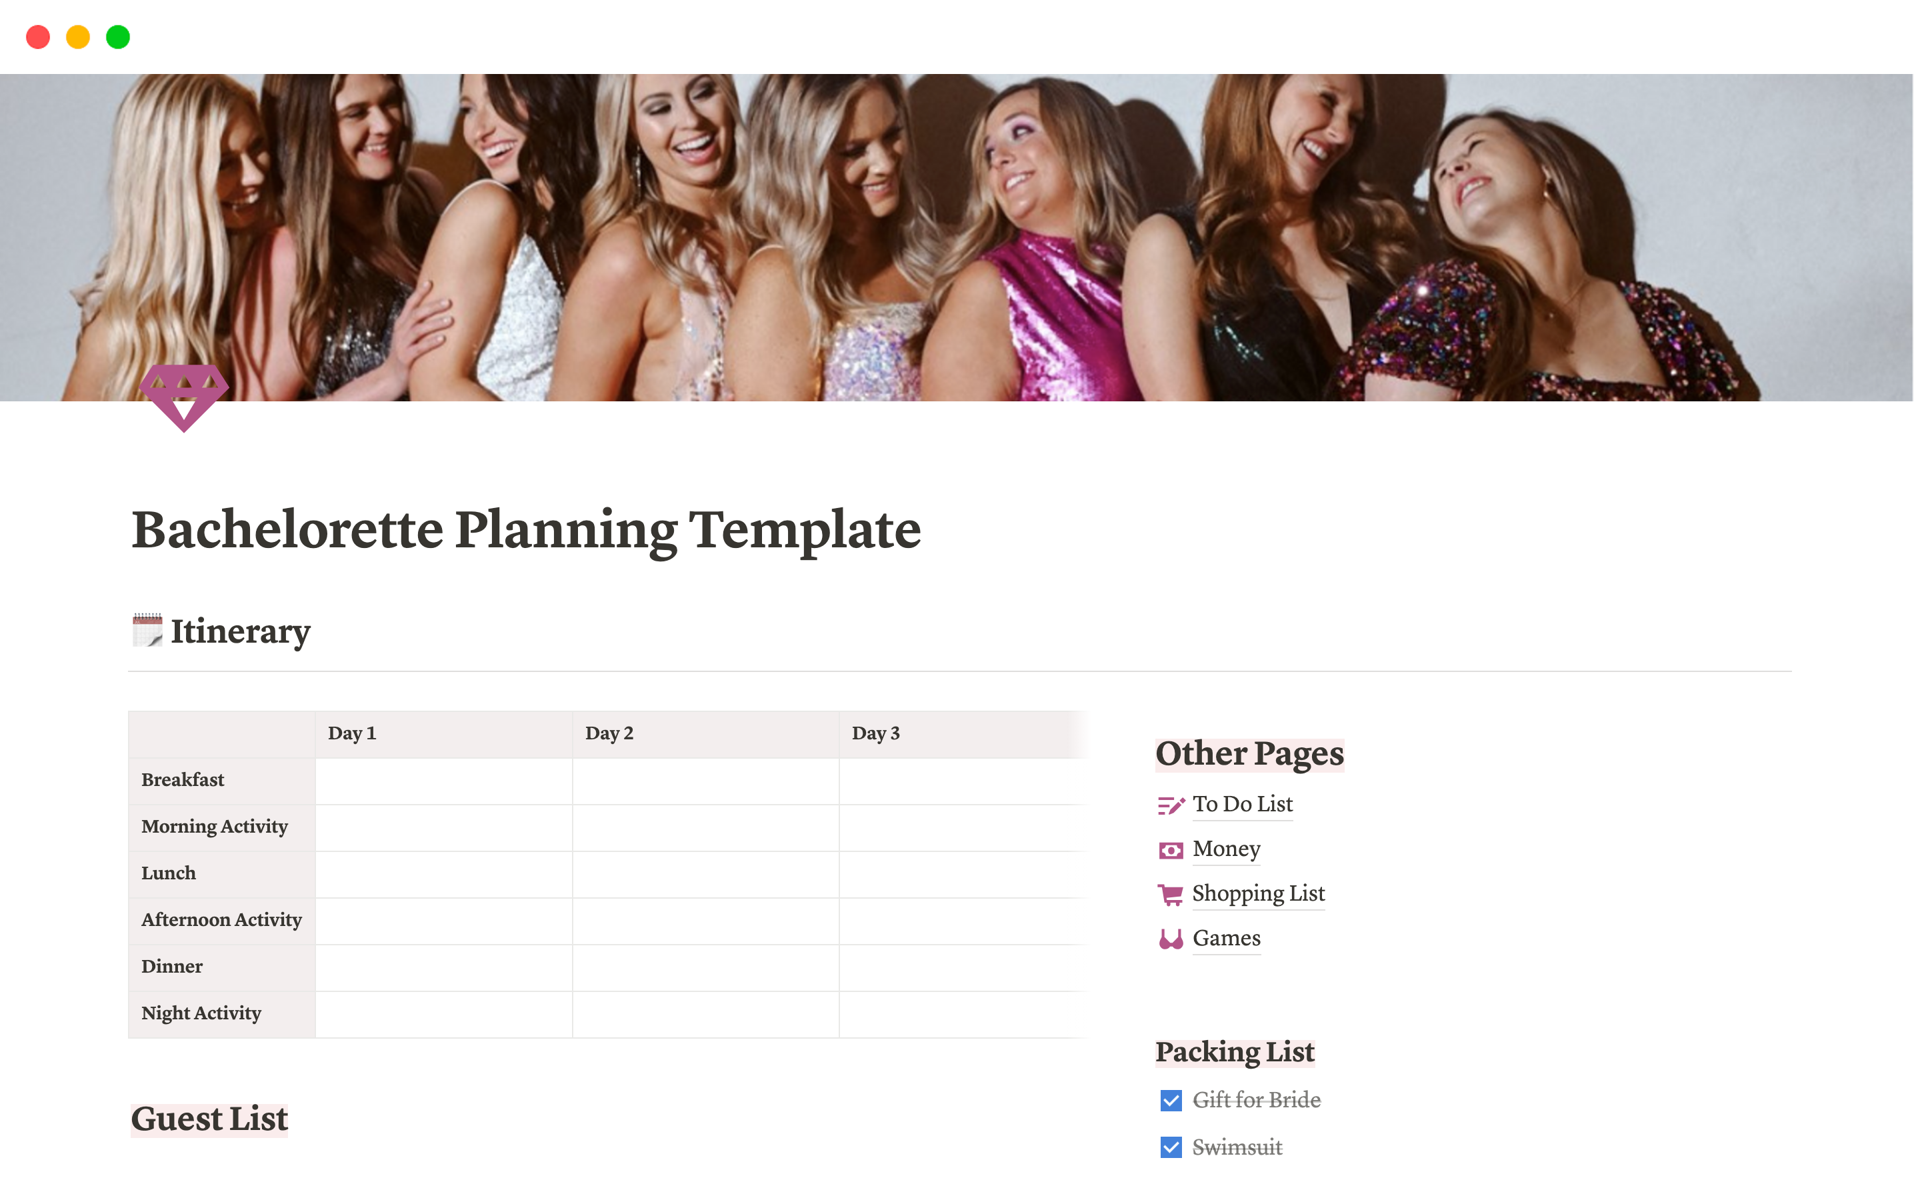 This helps you plan the perfect bachelorette!